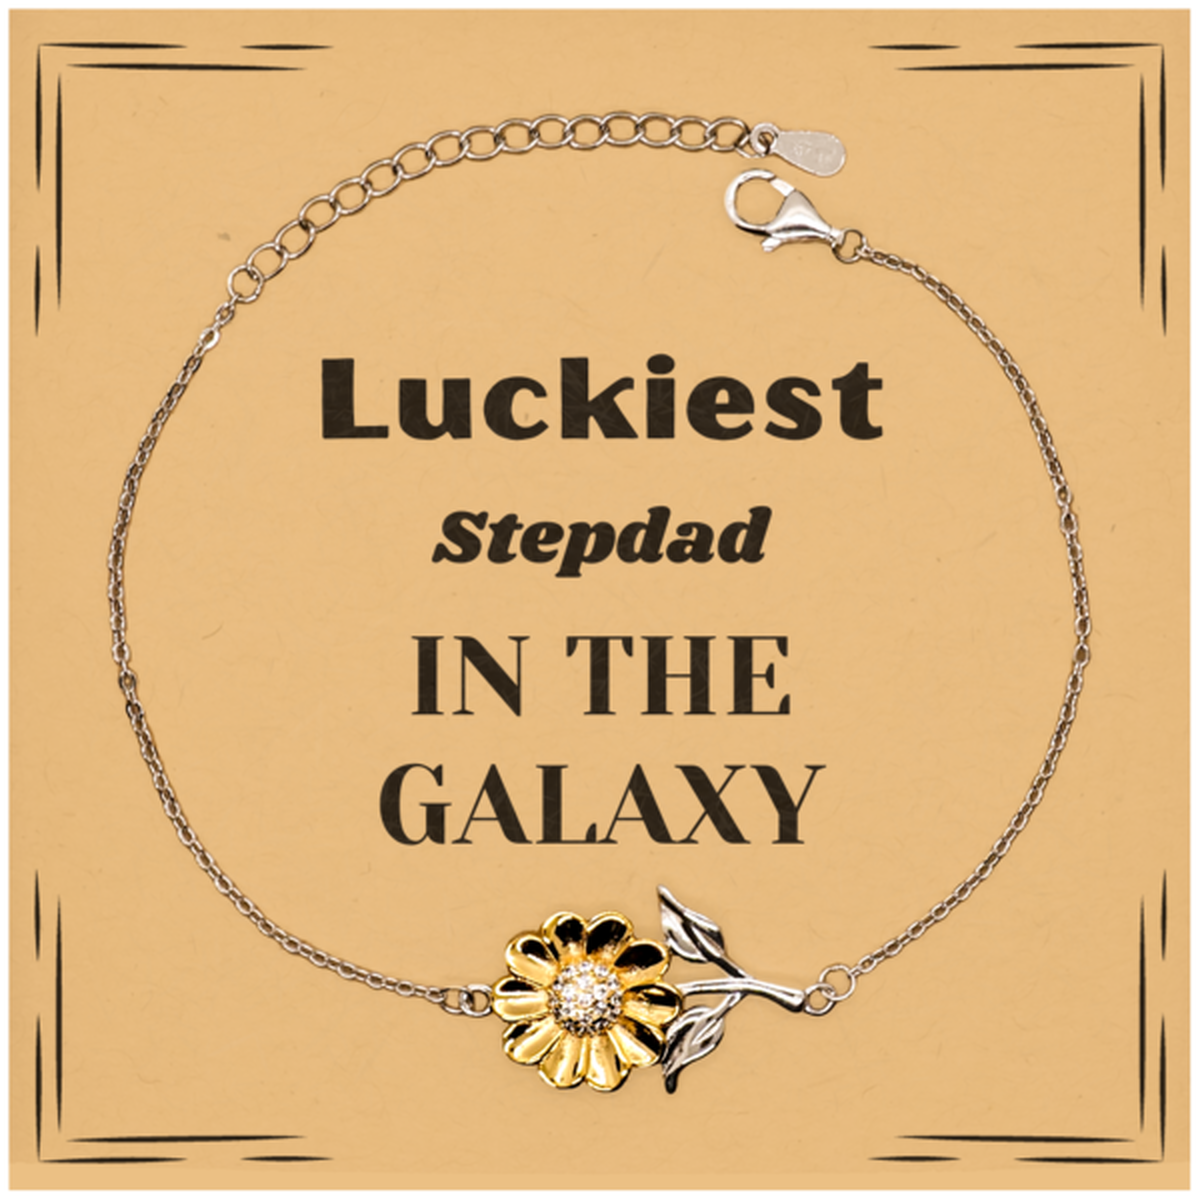 Luckiest Stepdad in the Galaxy, To My Stepdad Message Card Gifts, Christmas Stepdad Sunflower Bracelet Gifts, X-mas Birthday Unique Gifts For Stepdad Men Women